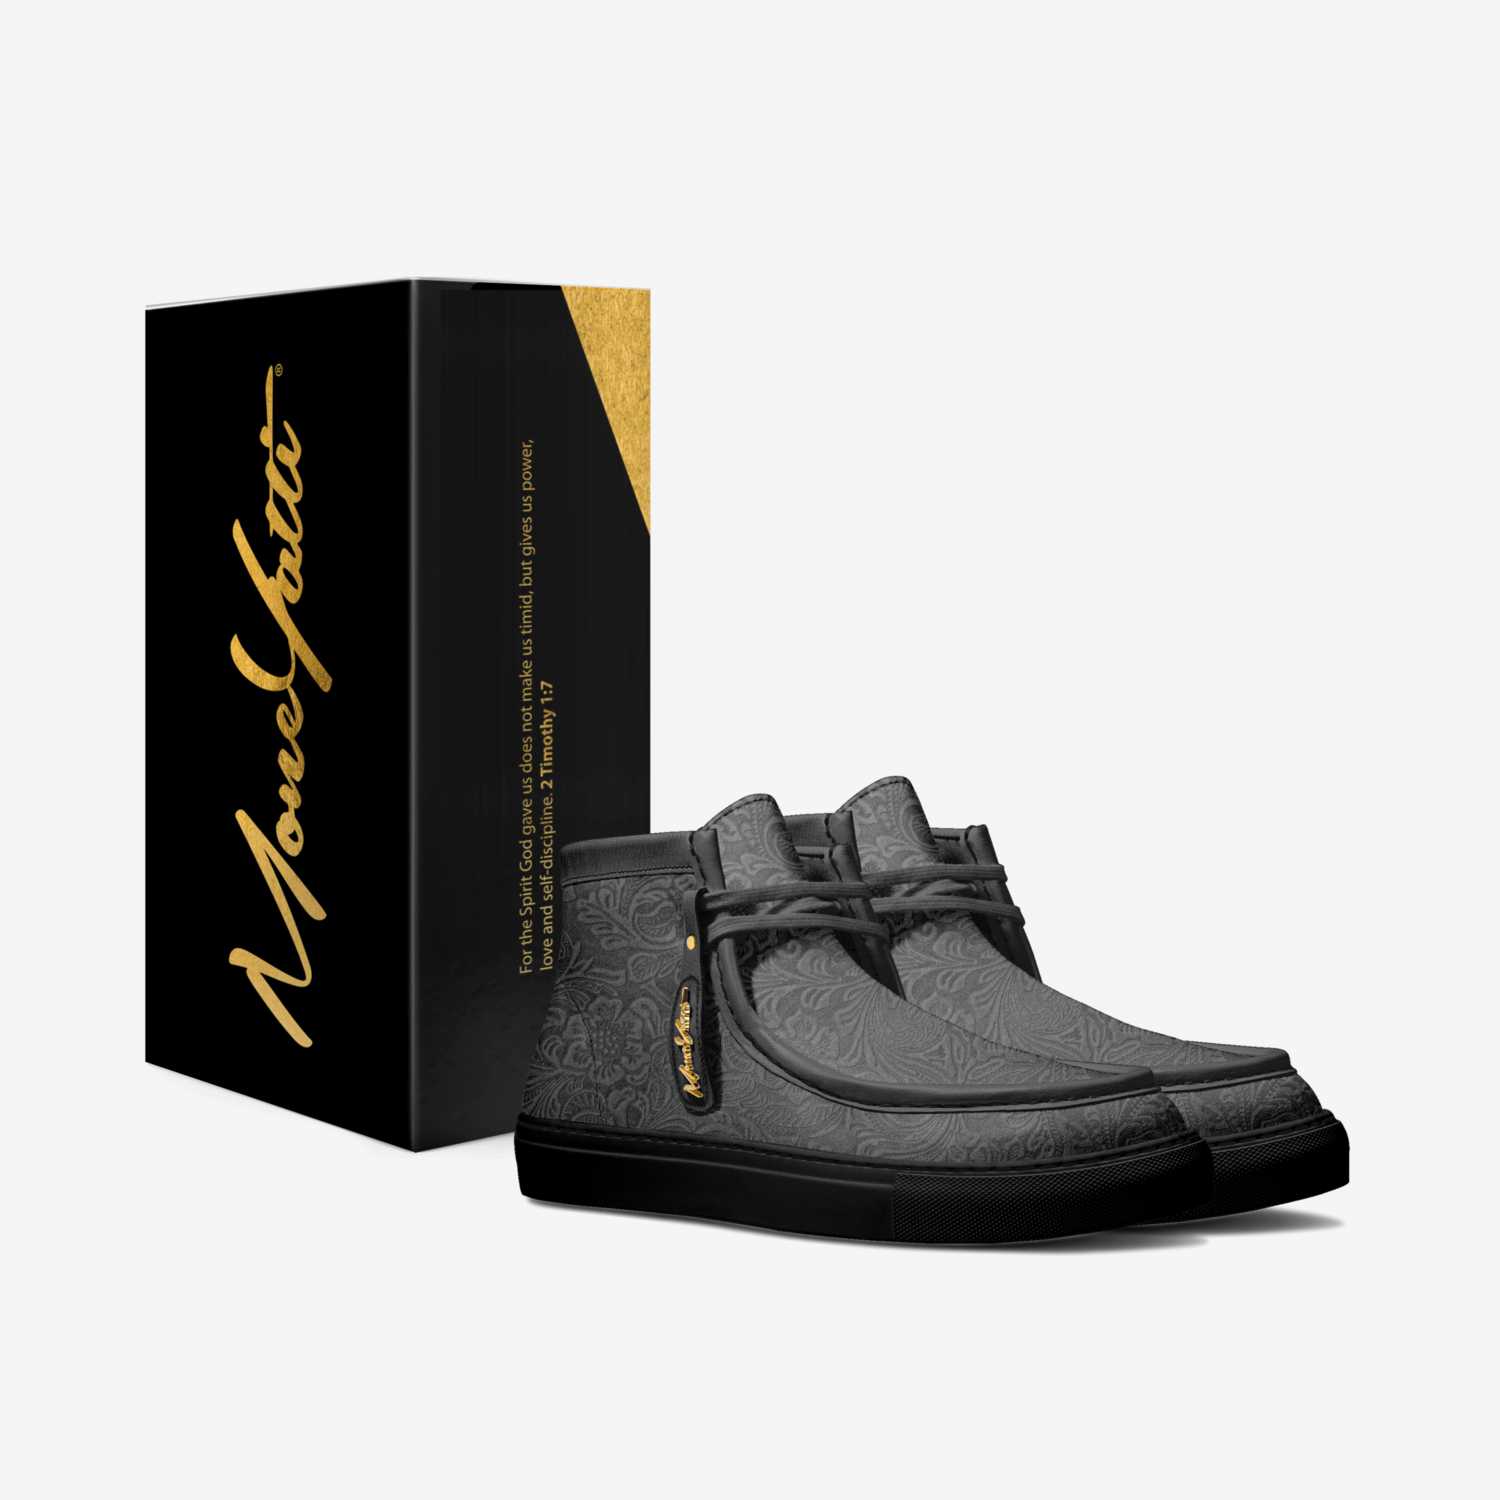 LUX 29 custom made in Italy shoes by Moneyatti Brand | Box view